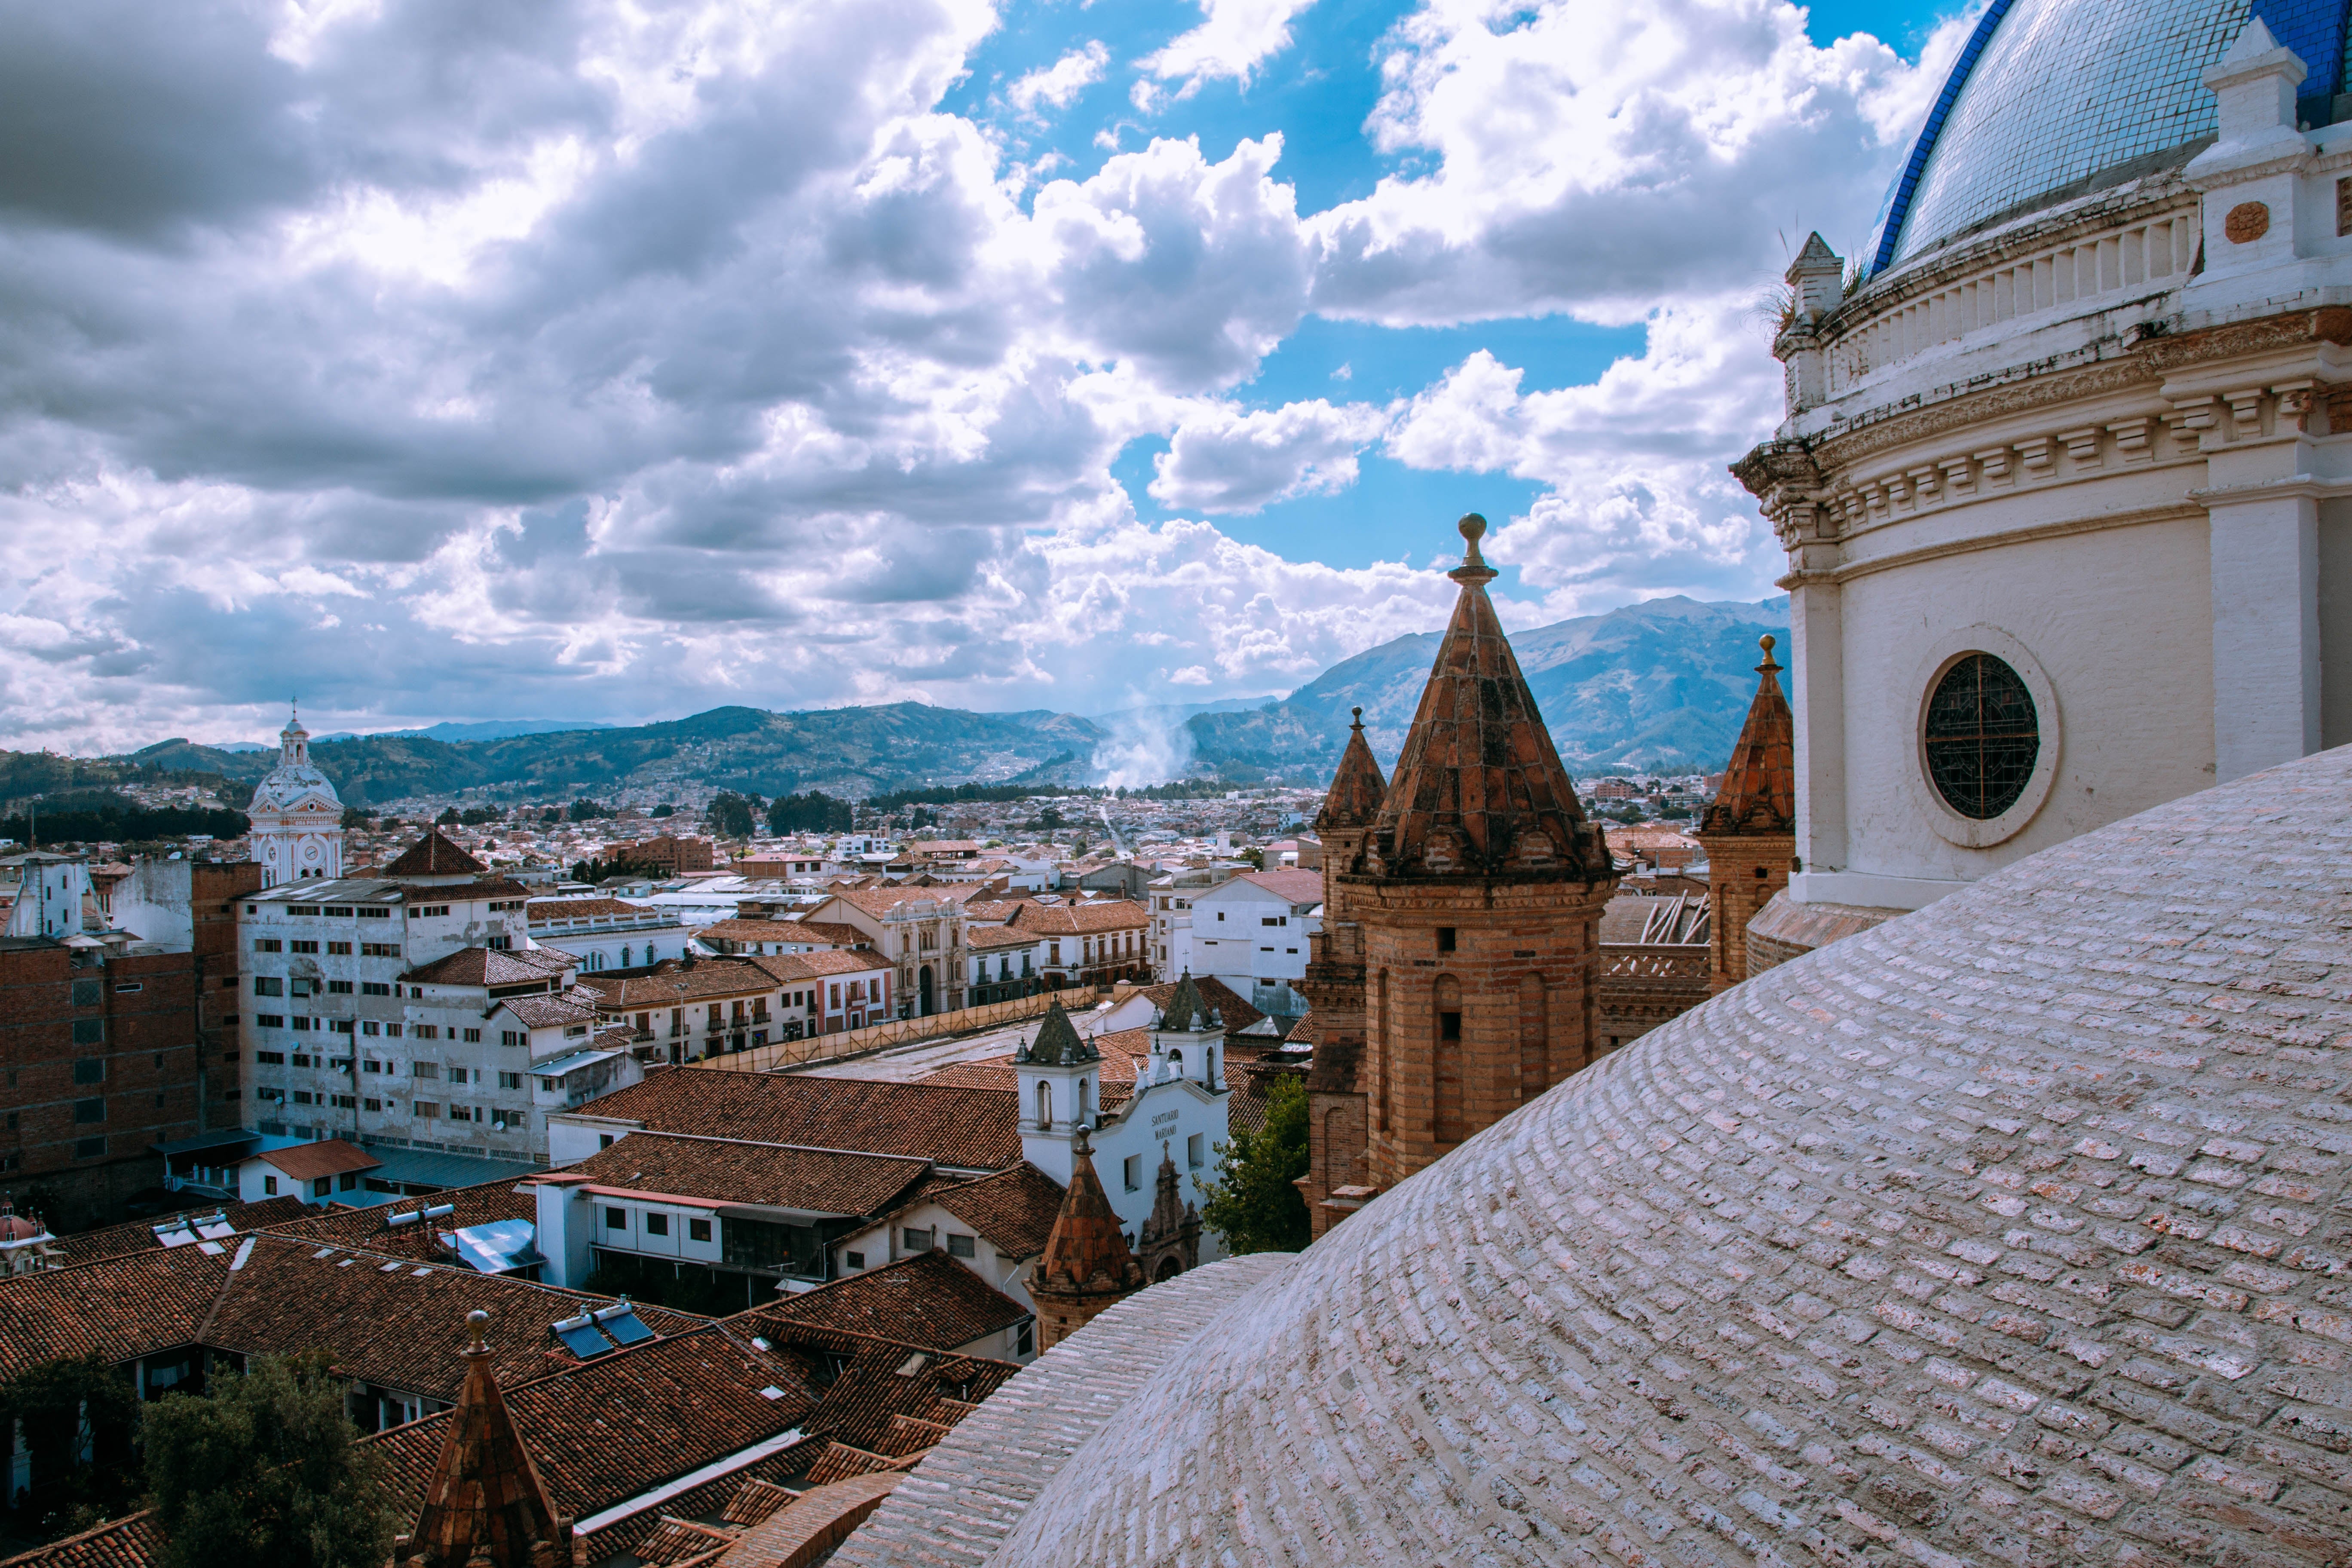 Cuenca owes its great climate to its close proximity to the Equator (around 200 miles)